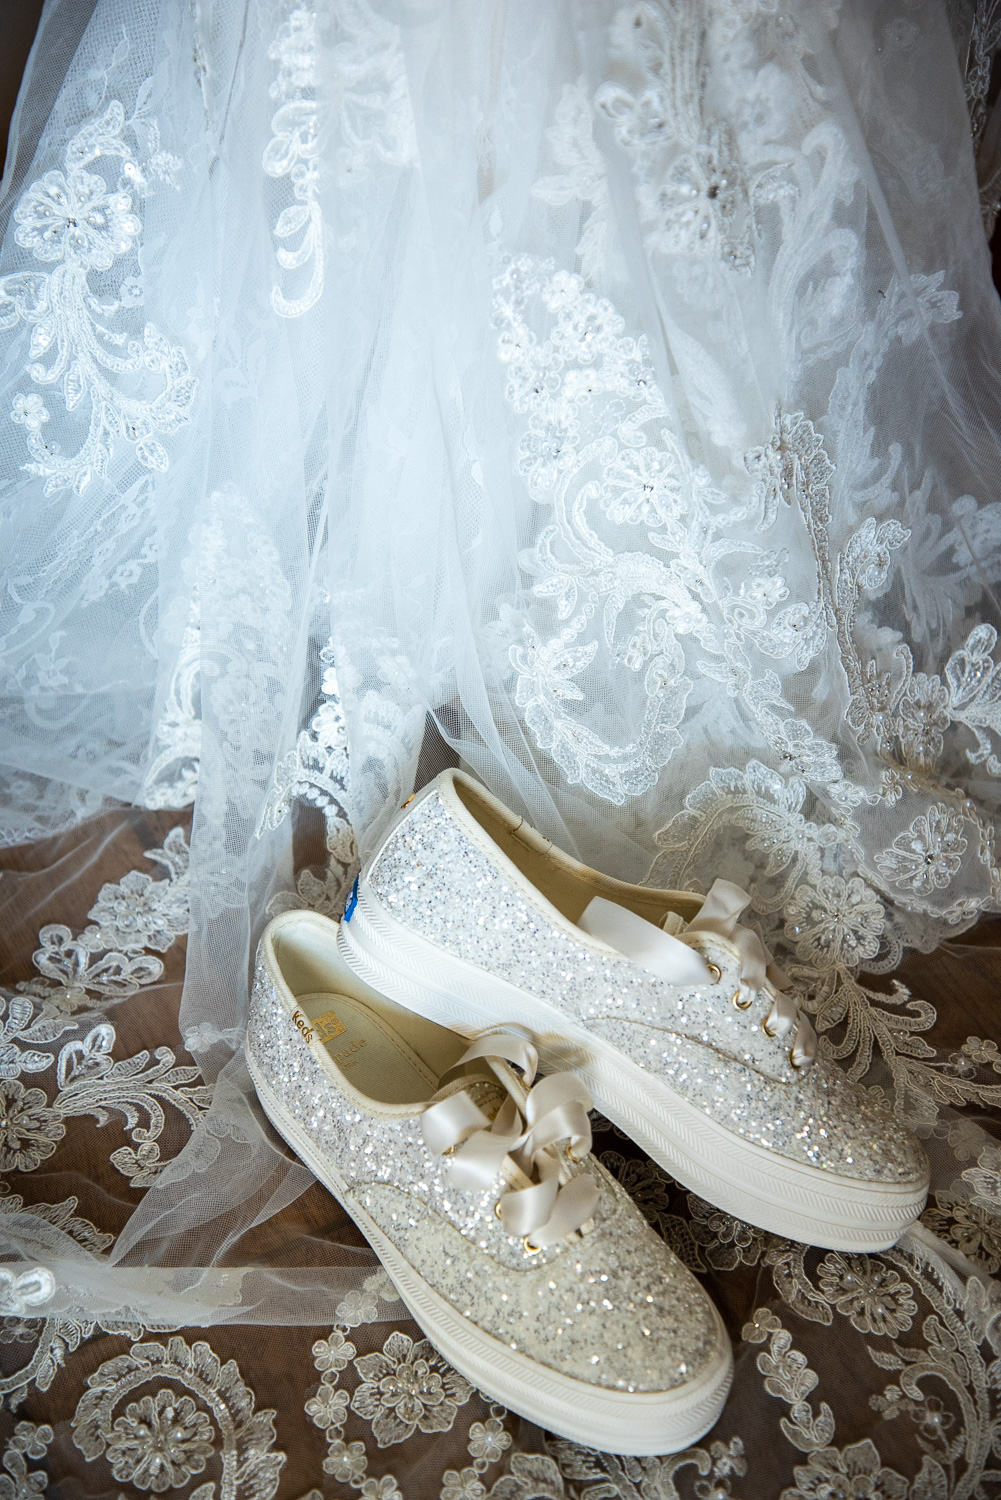 Brides reception shoes on the wedding dress